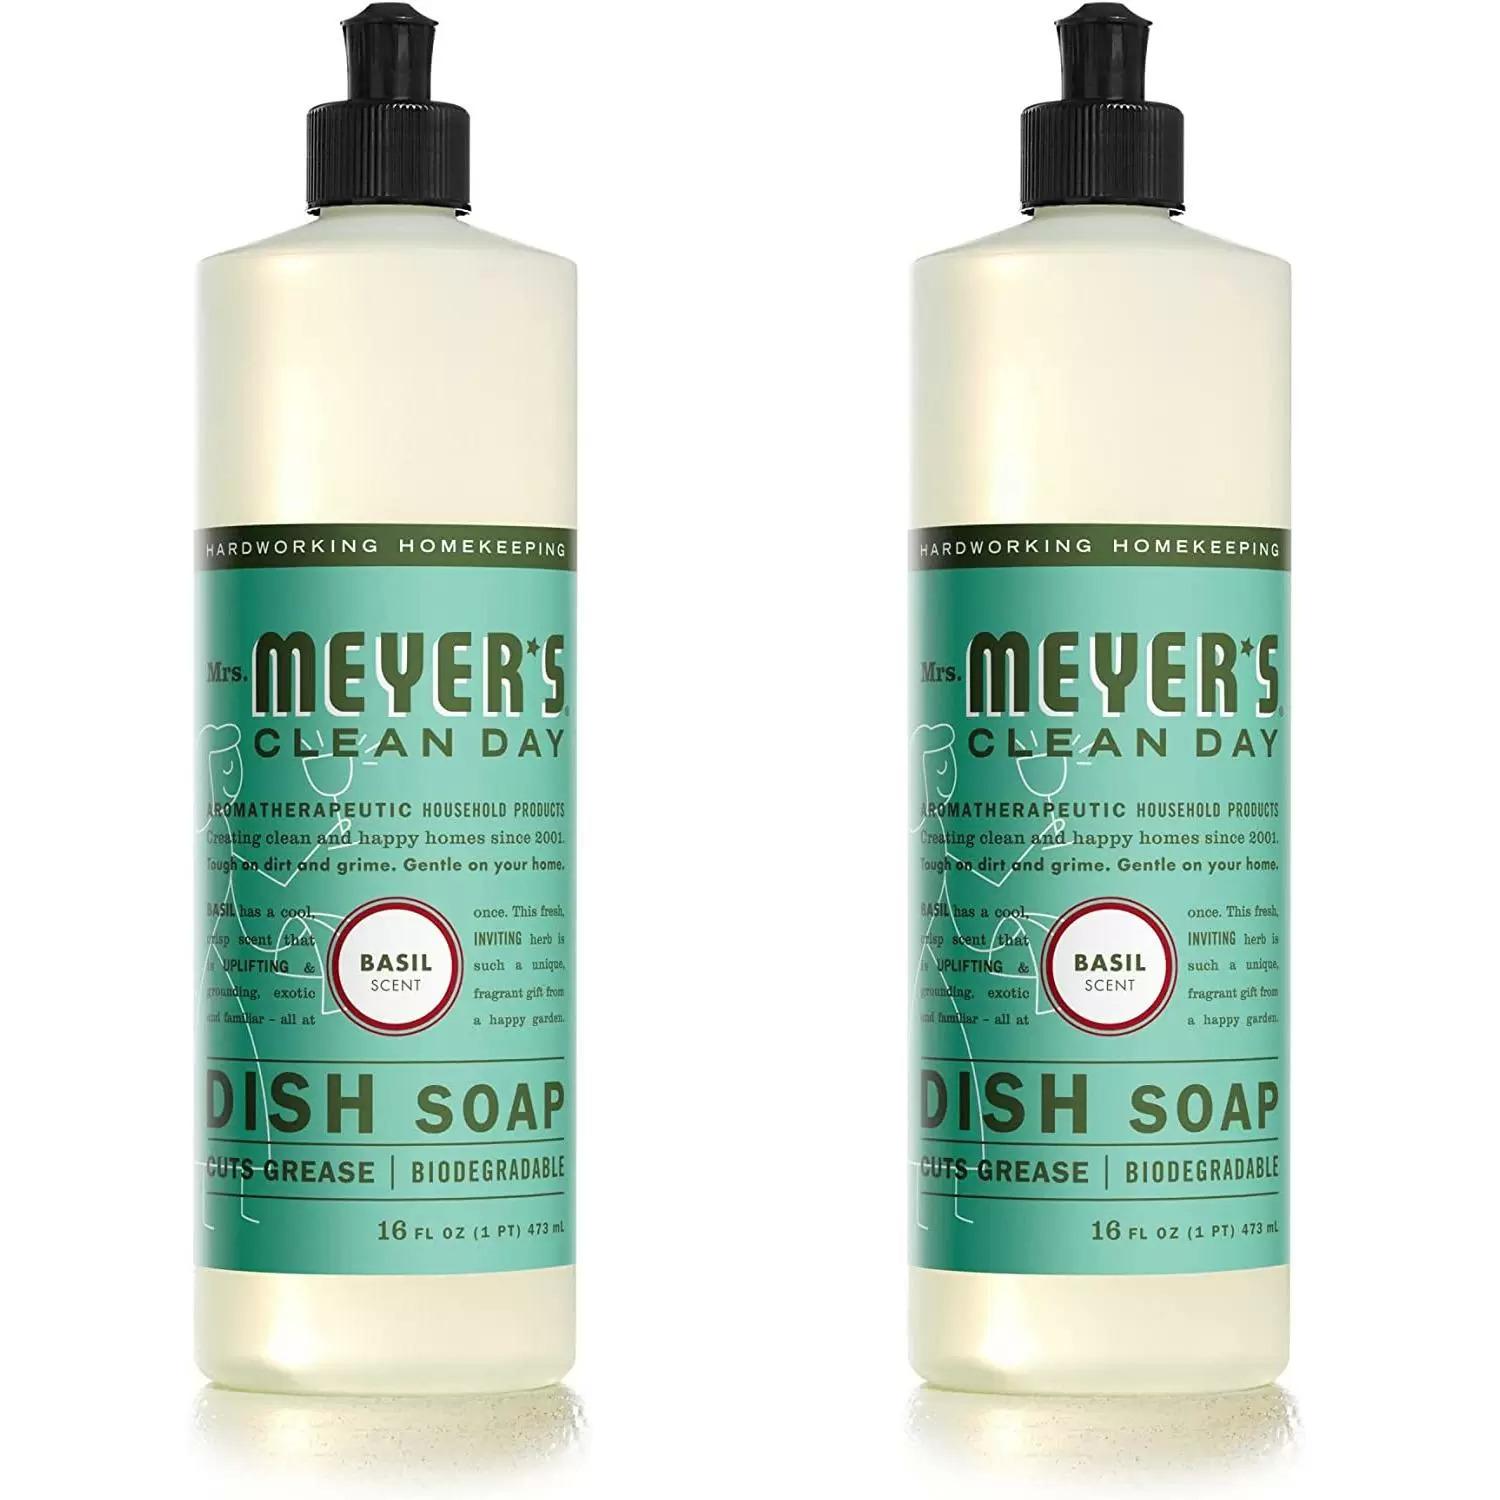 Mrs Meyers Liquid Dish Soap 2 Pack for $5.98